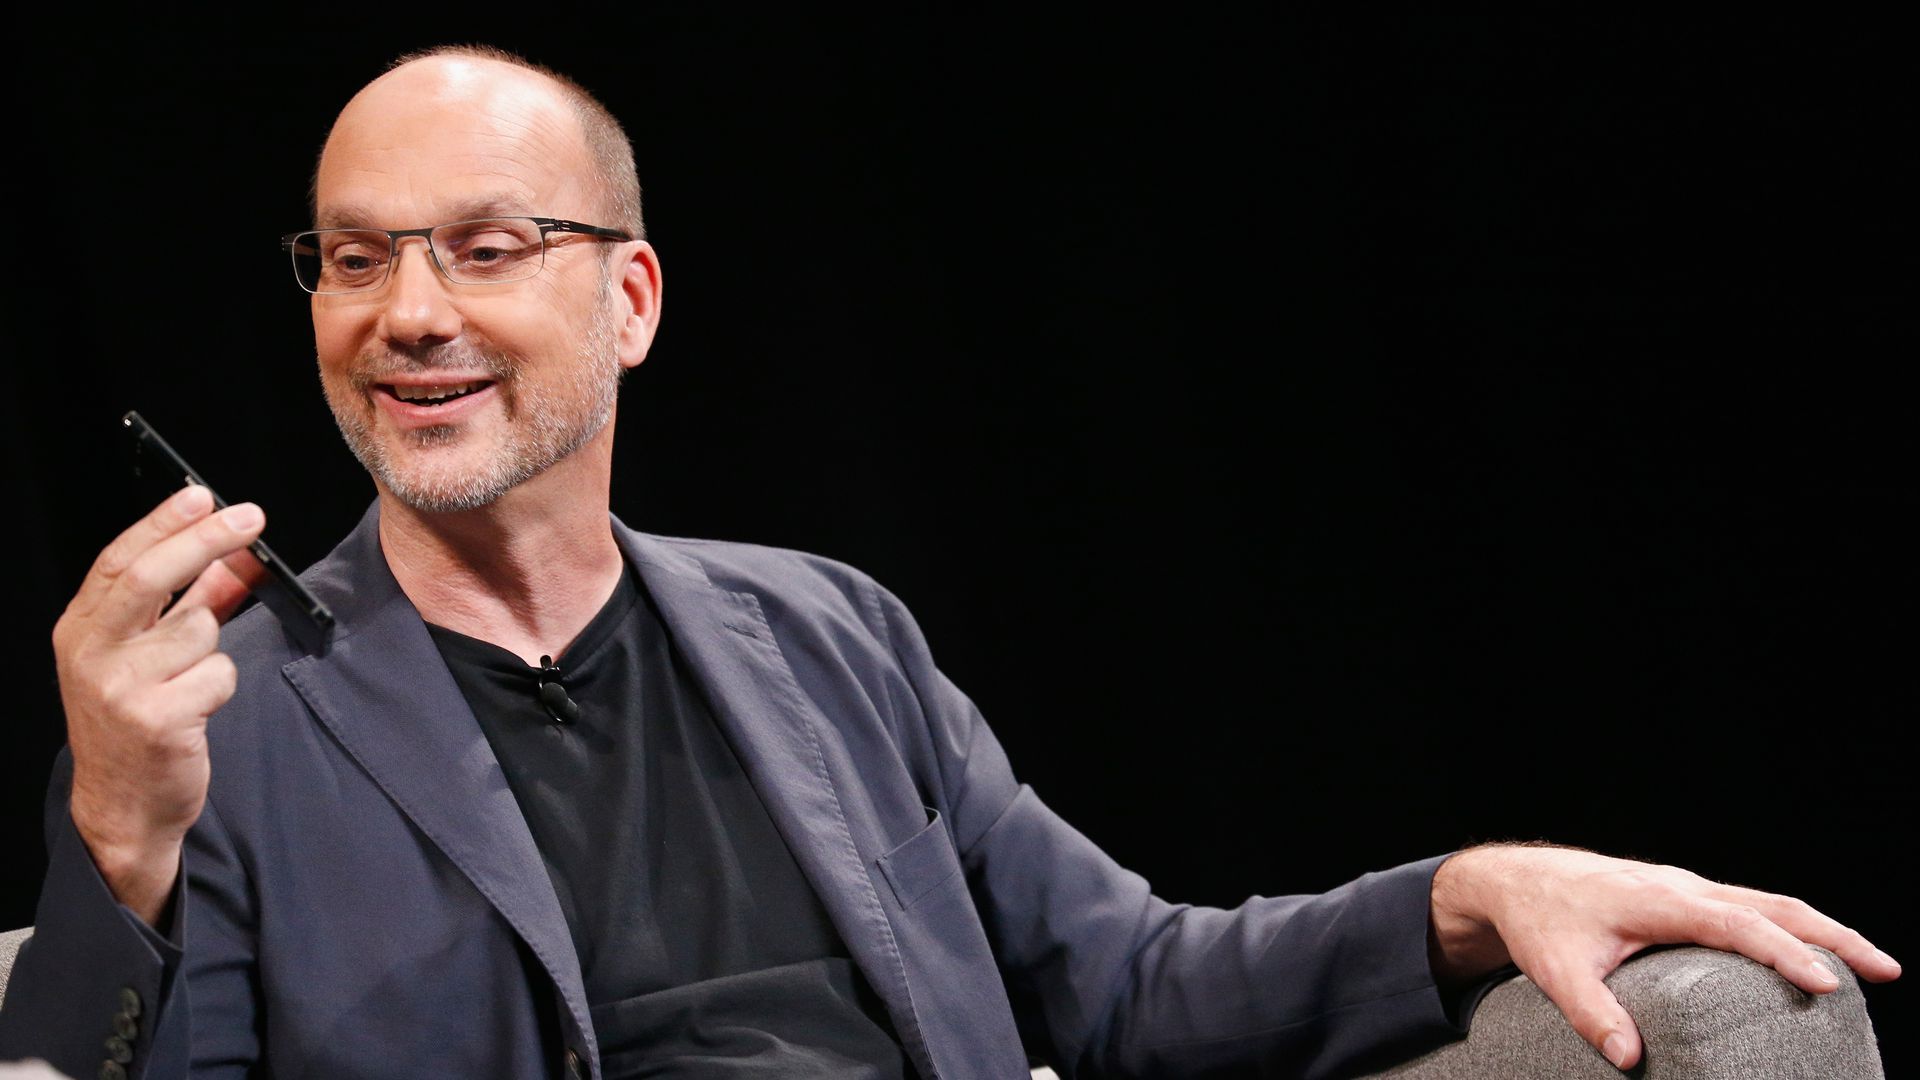 Andy Rubin holding a smartphone